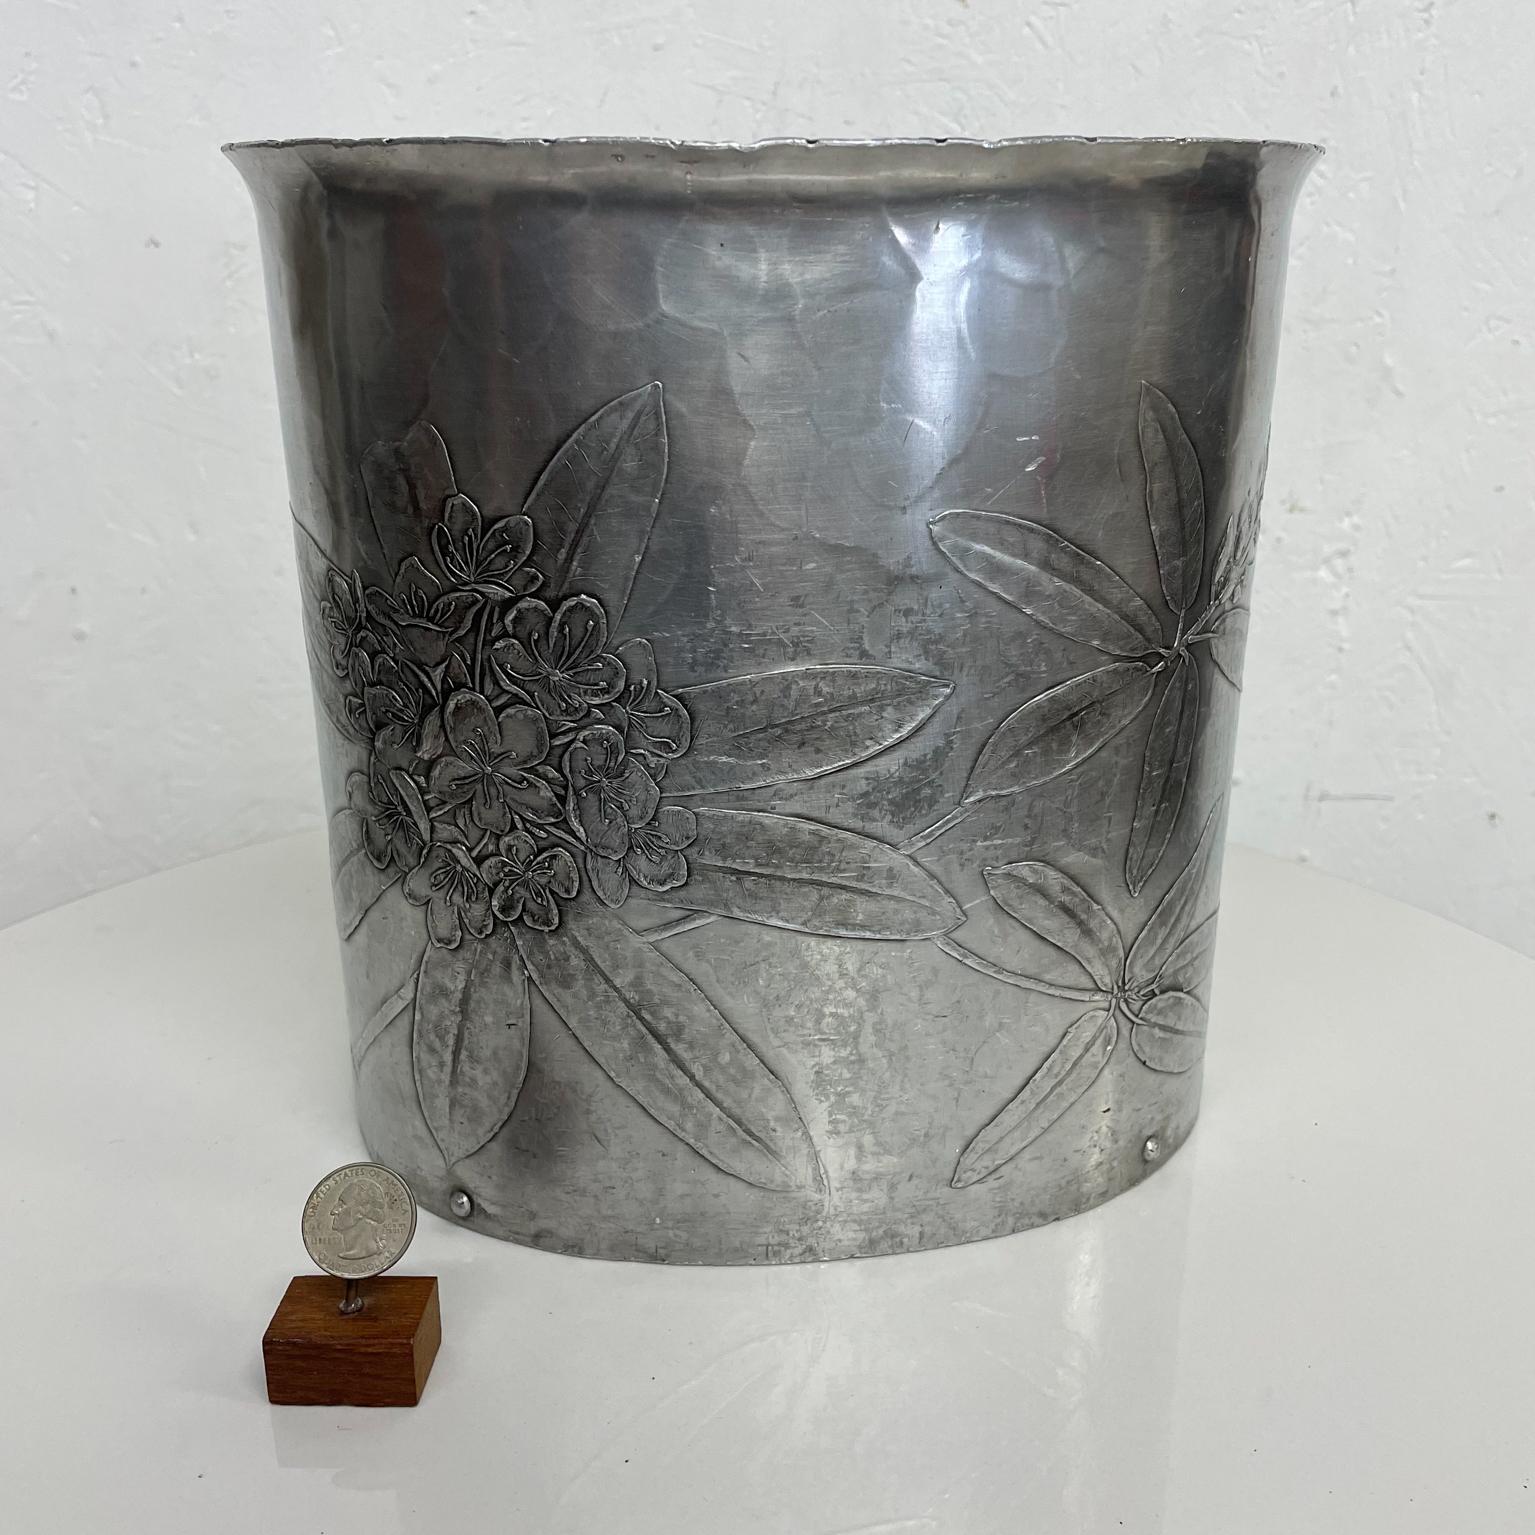 Waste basket
1960s Wendell August Forge Floral Motif Waste Basket in Hammered Aluminum Grove City PA
Maker Stamped on the bottom.
Preowned original vintage condition.
Measures: 10 w x 7.5 d x 10 tall
See provided images.